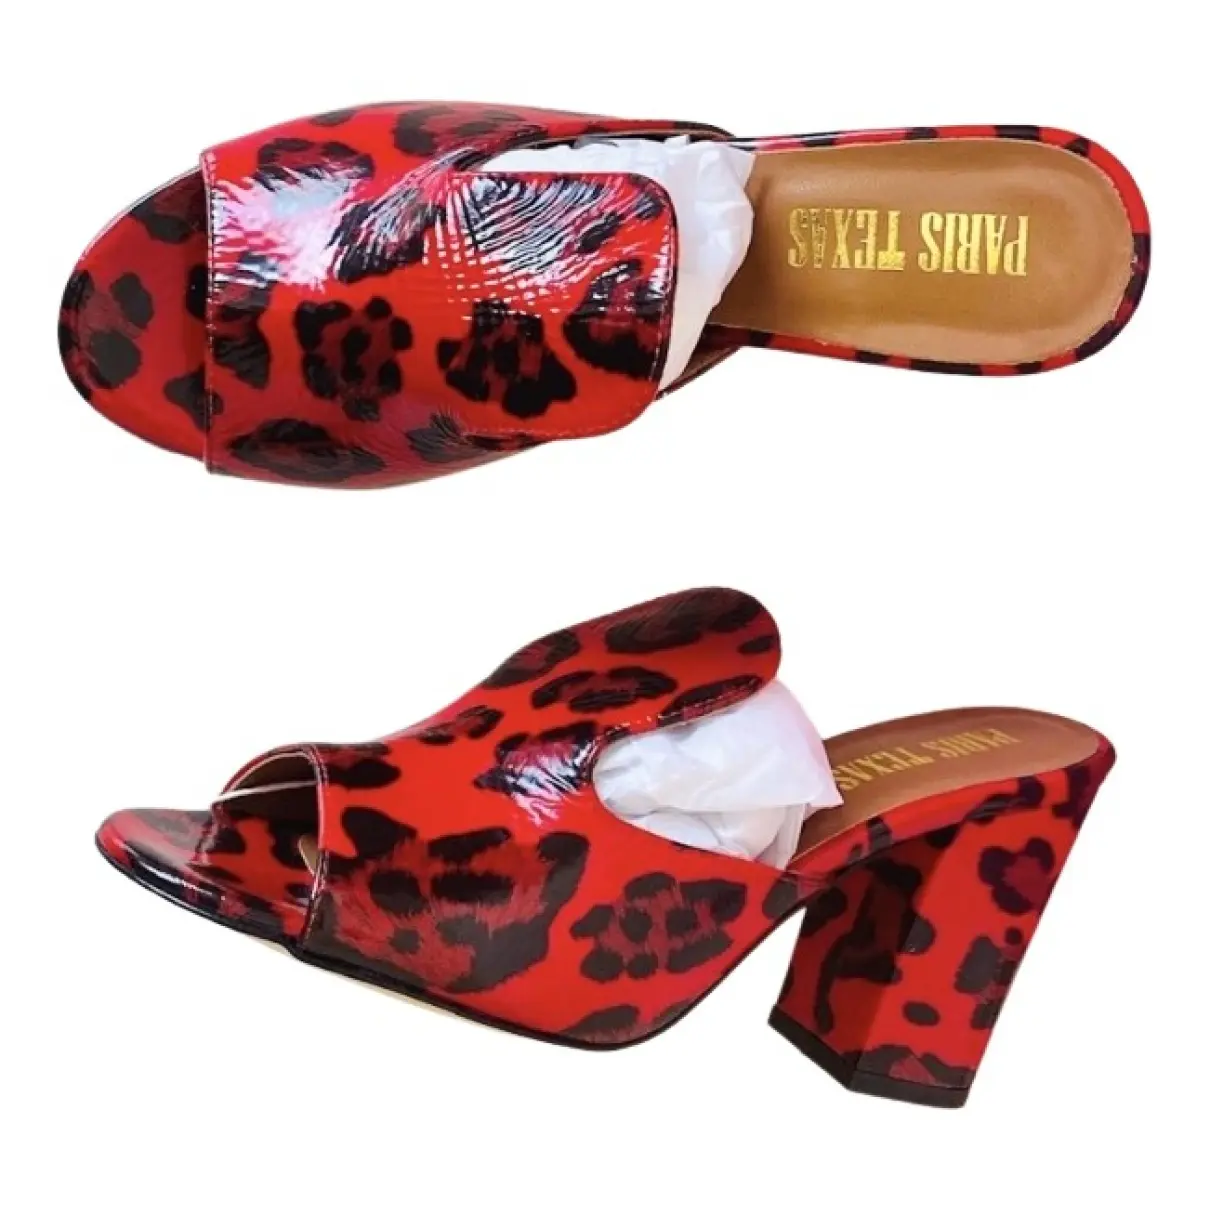 Patent leather mules & clogs